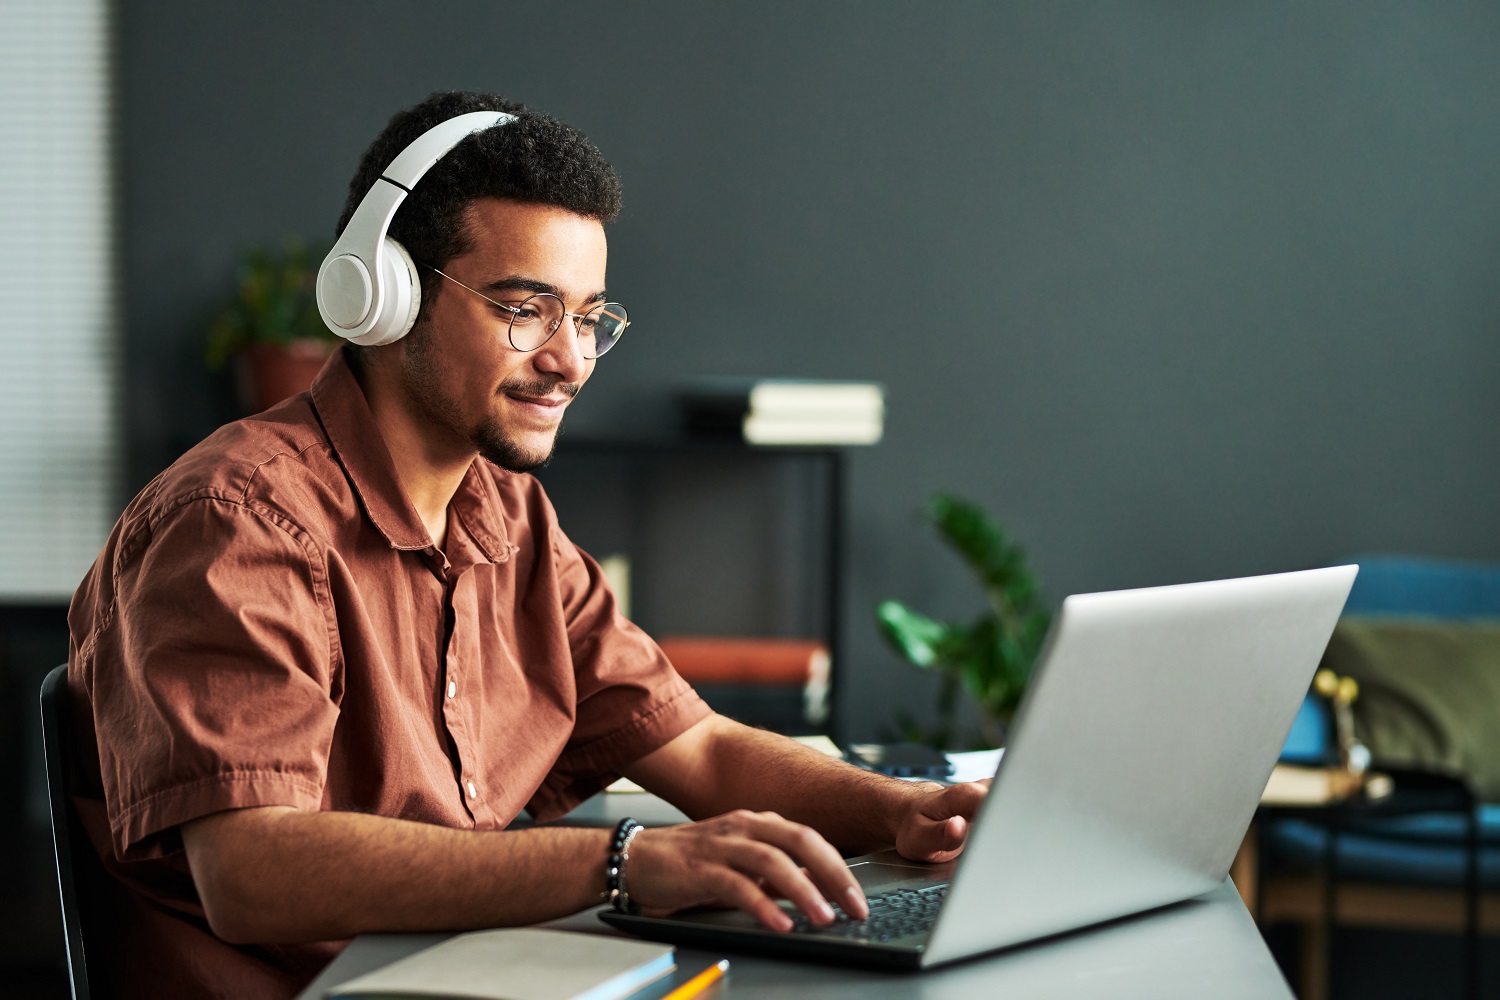 A man wearing a headset uses a laptop.